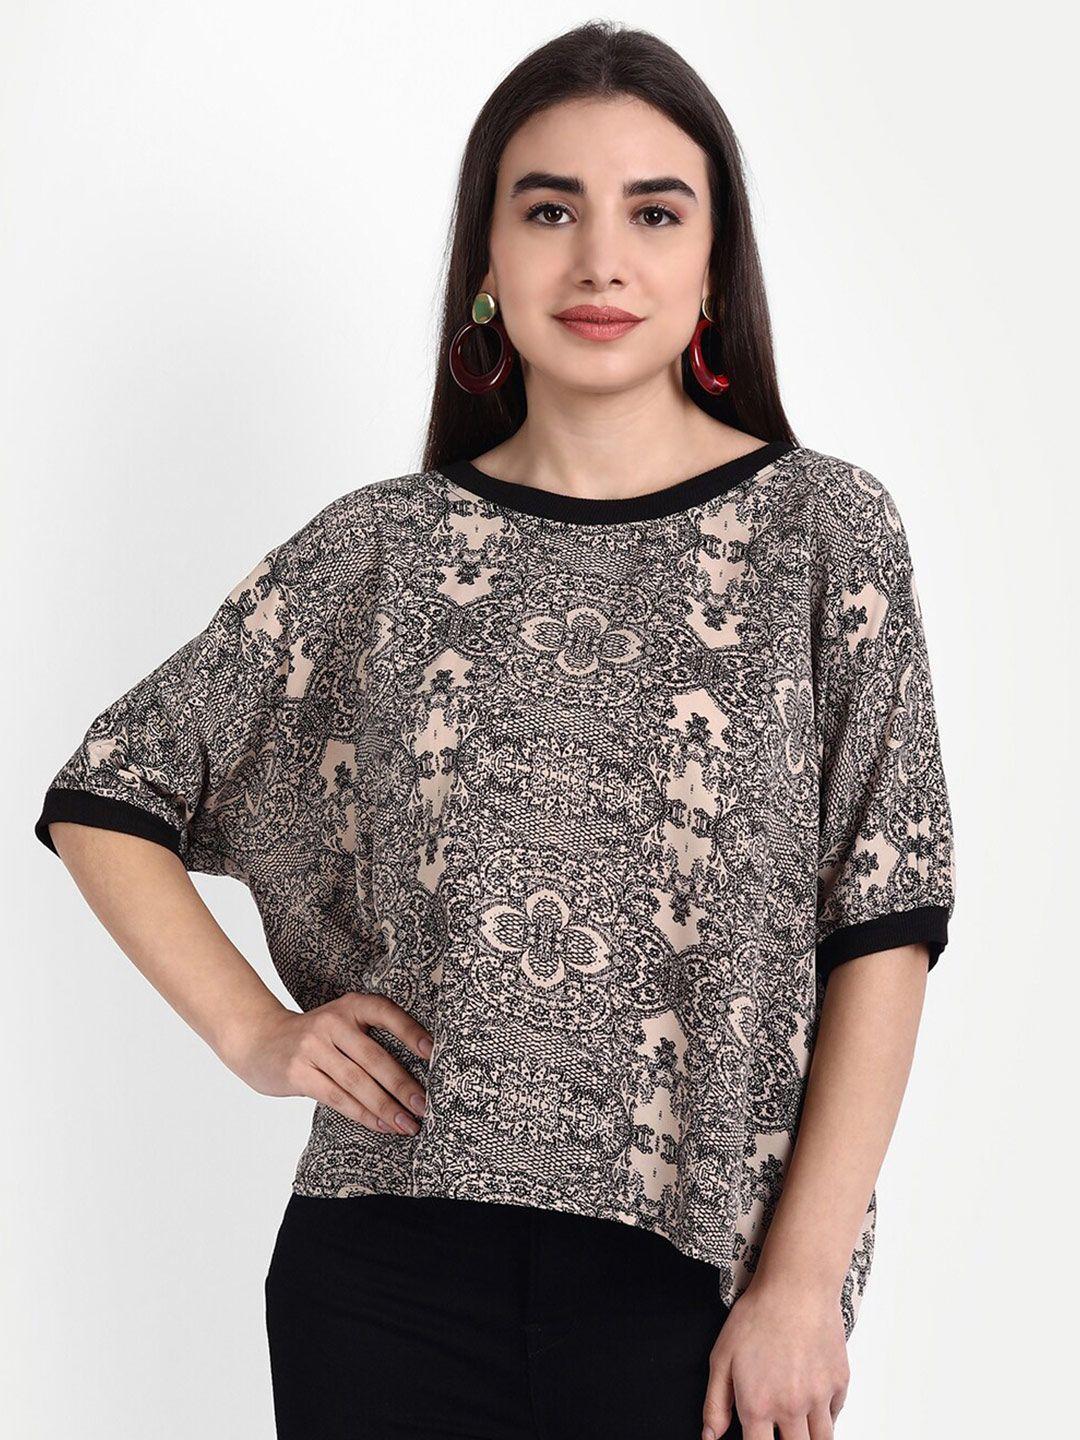 rediscover-fashion-beige-floral-print-free-size-rib-top